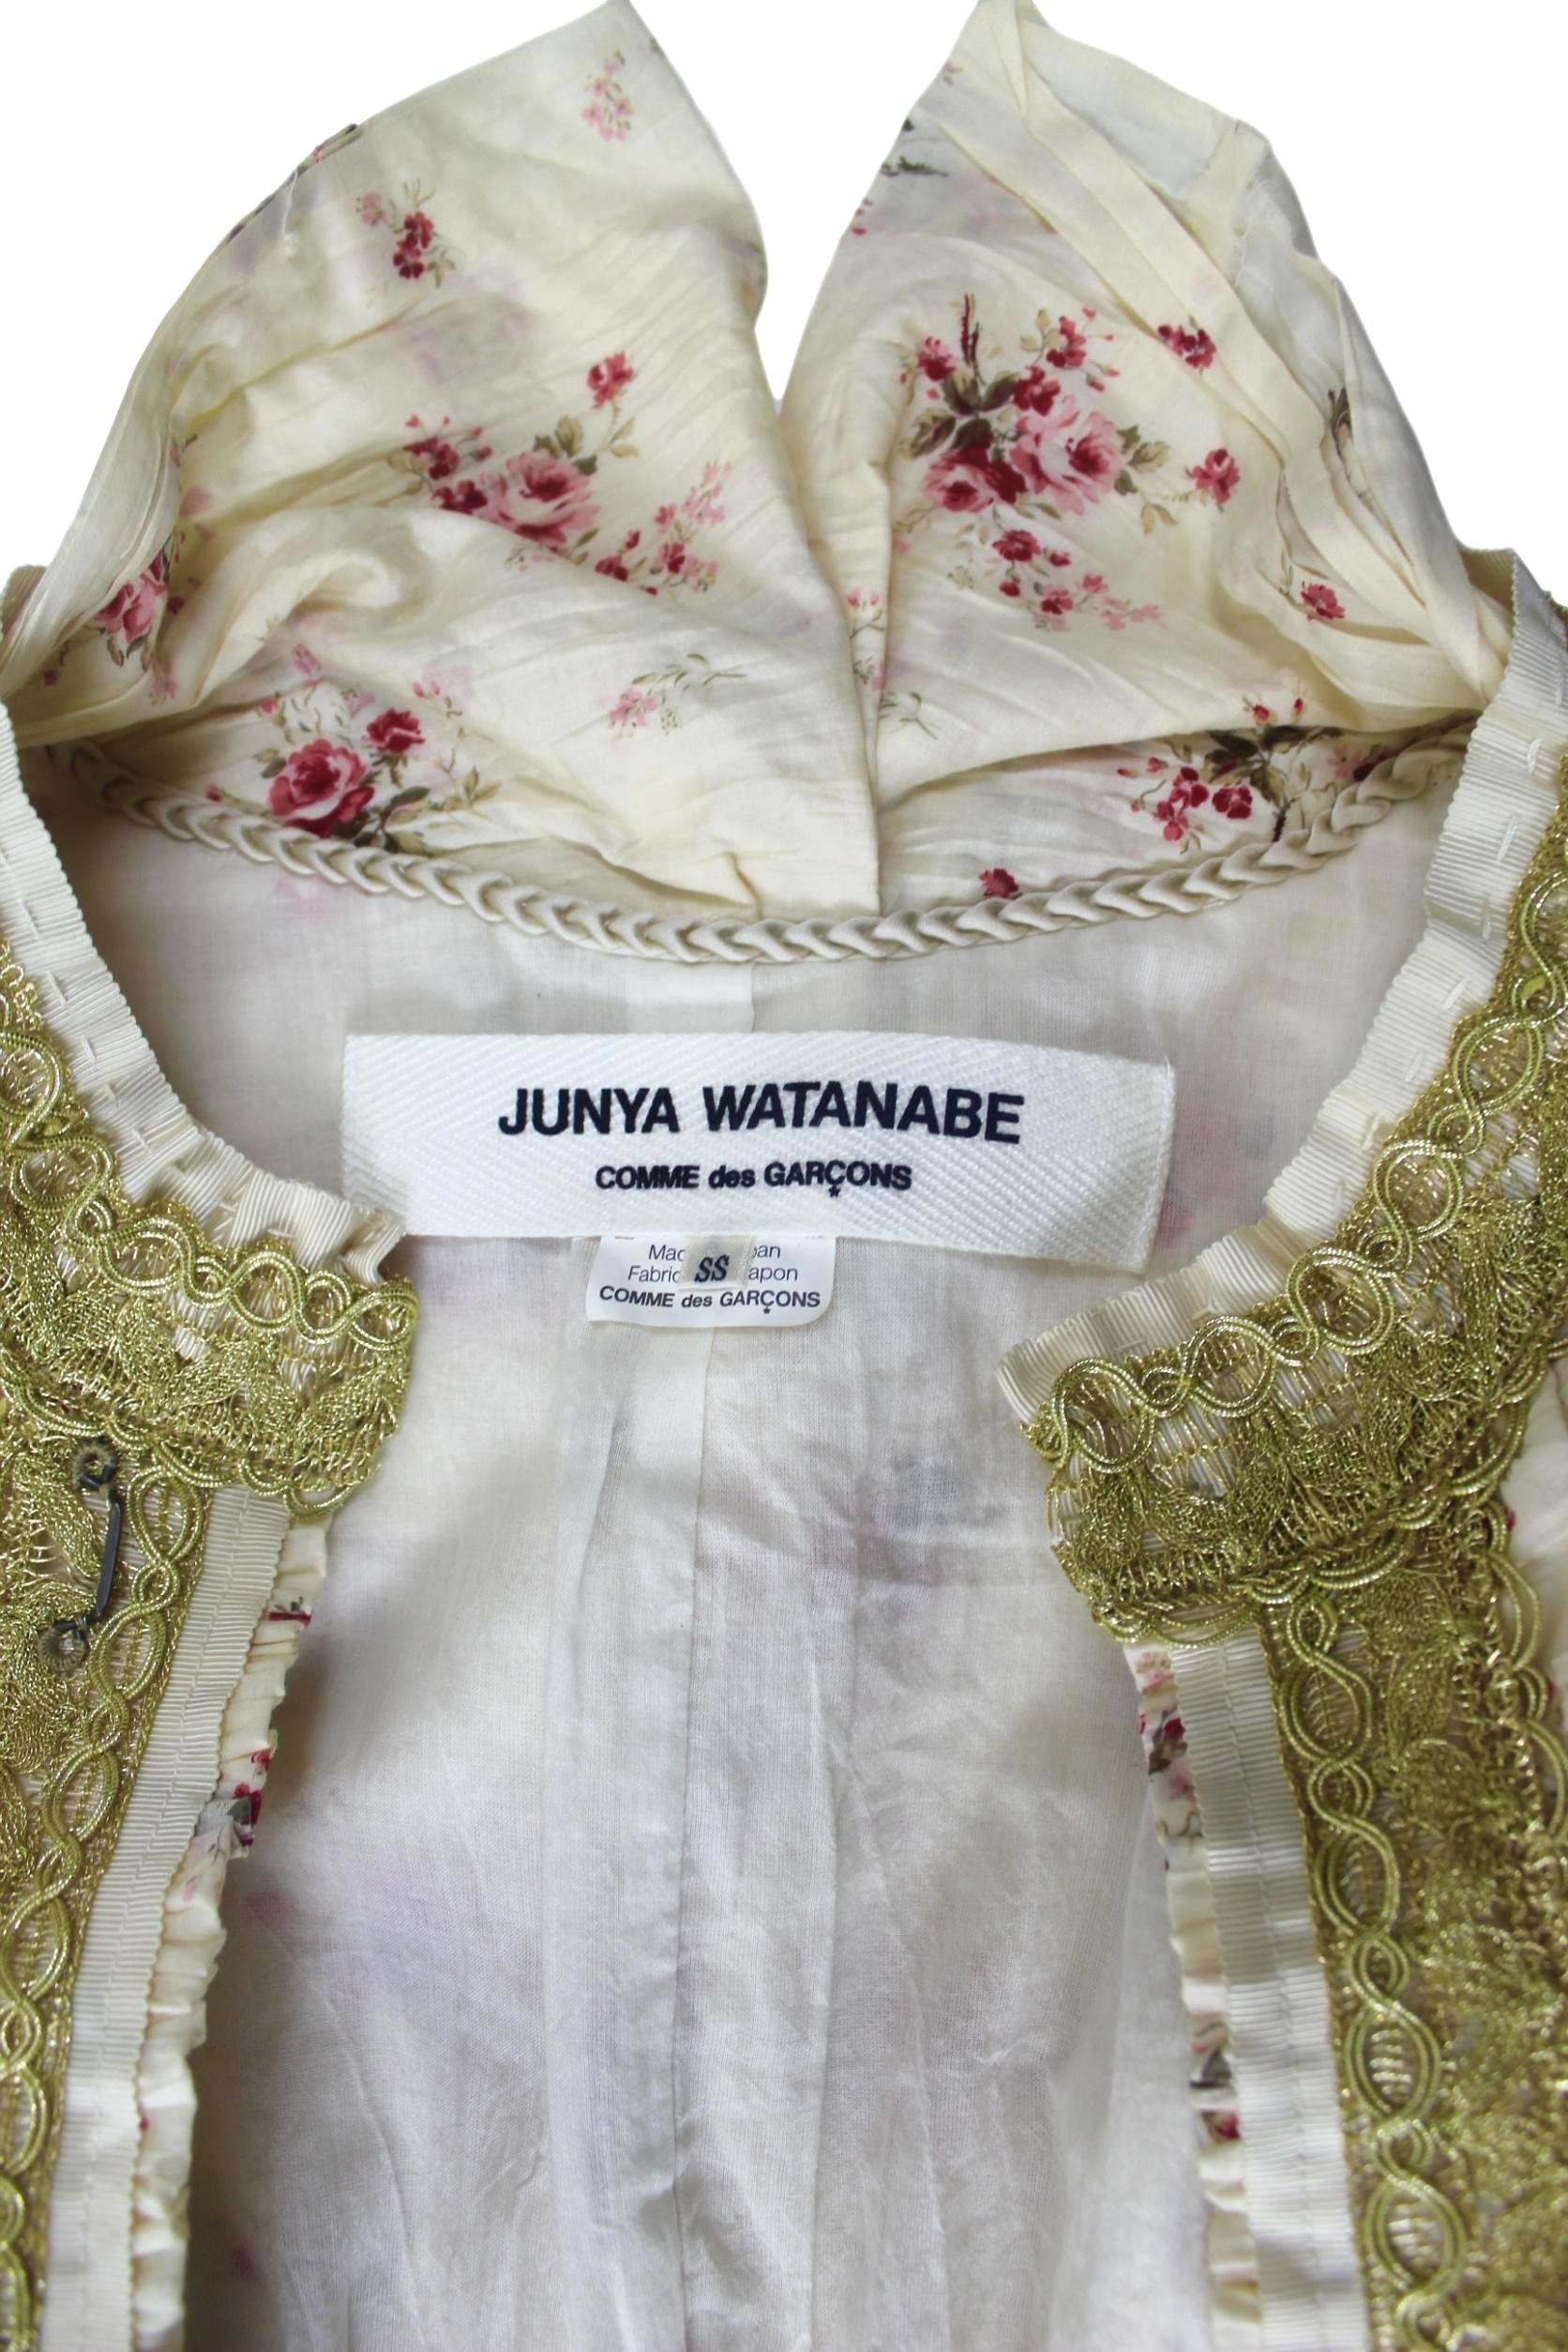 Junya Watanabe Comme des Garcons Floral Pleated Jacket AD2007 For Sale 6